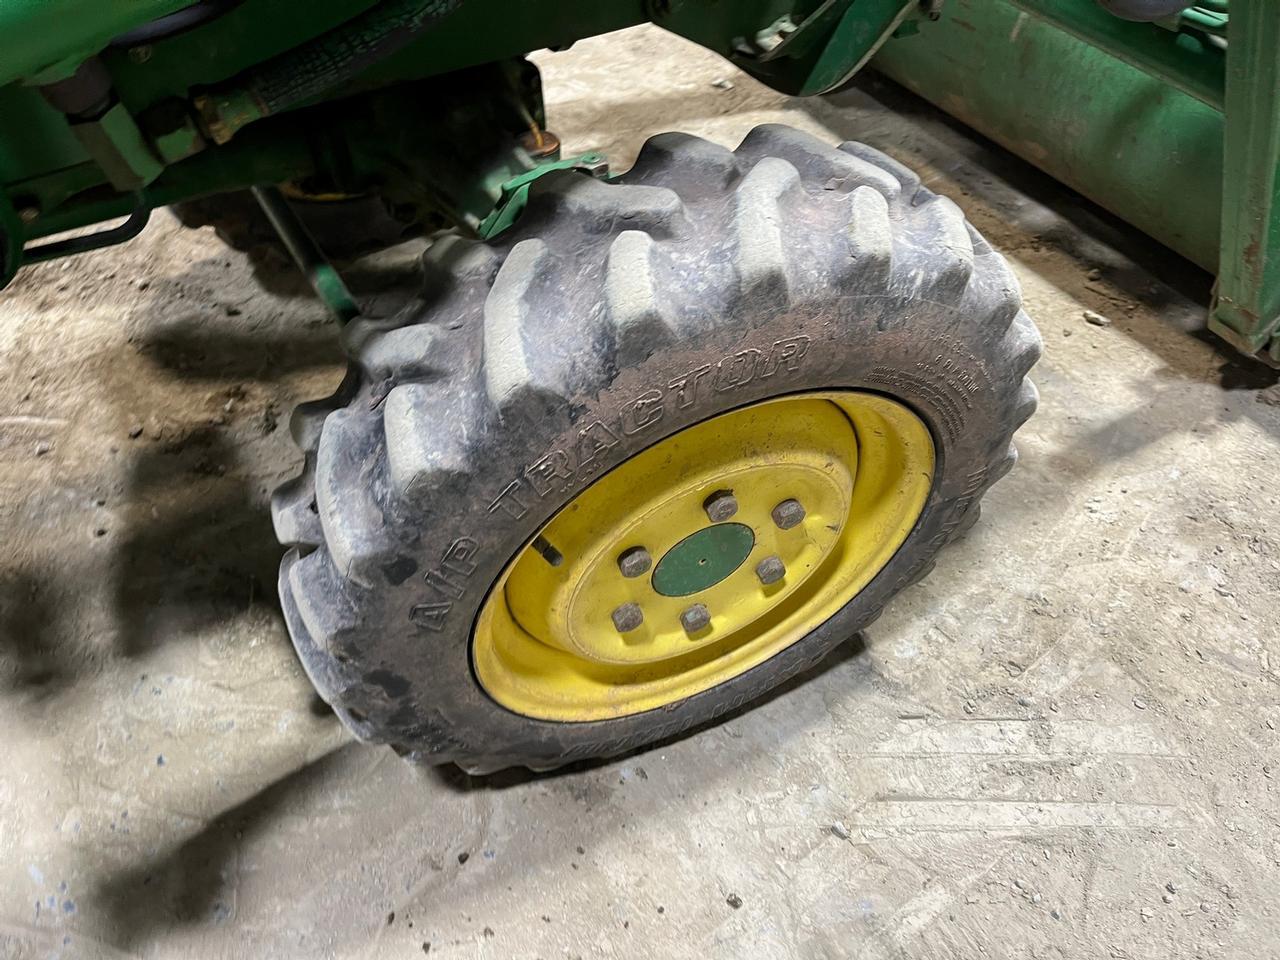 John Deere 750 Compact Tractor with Loader